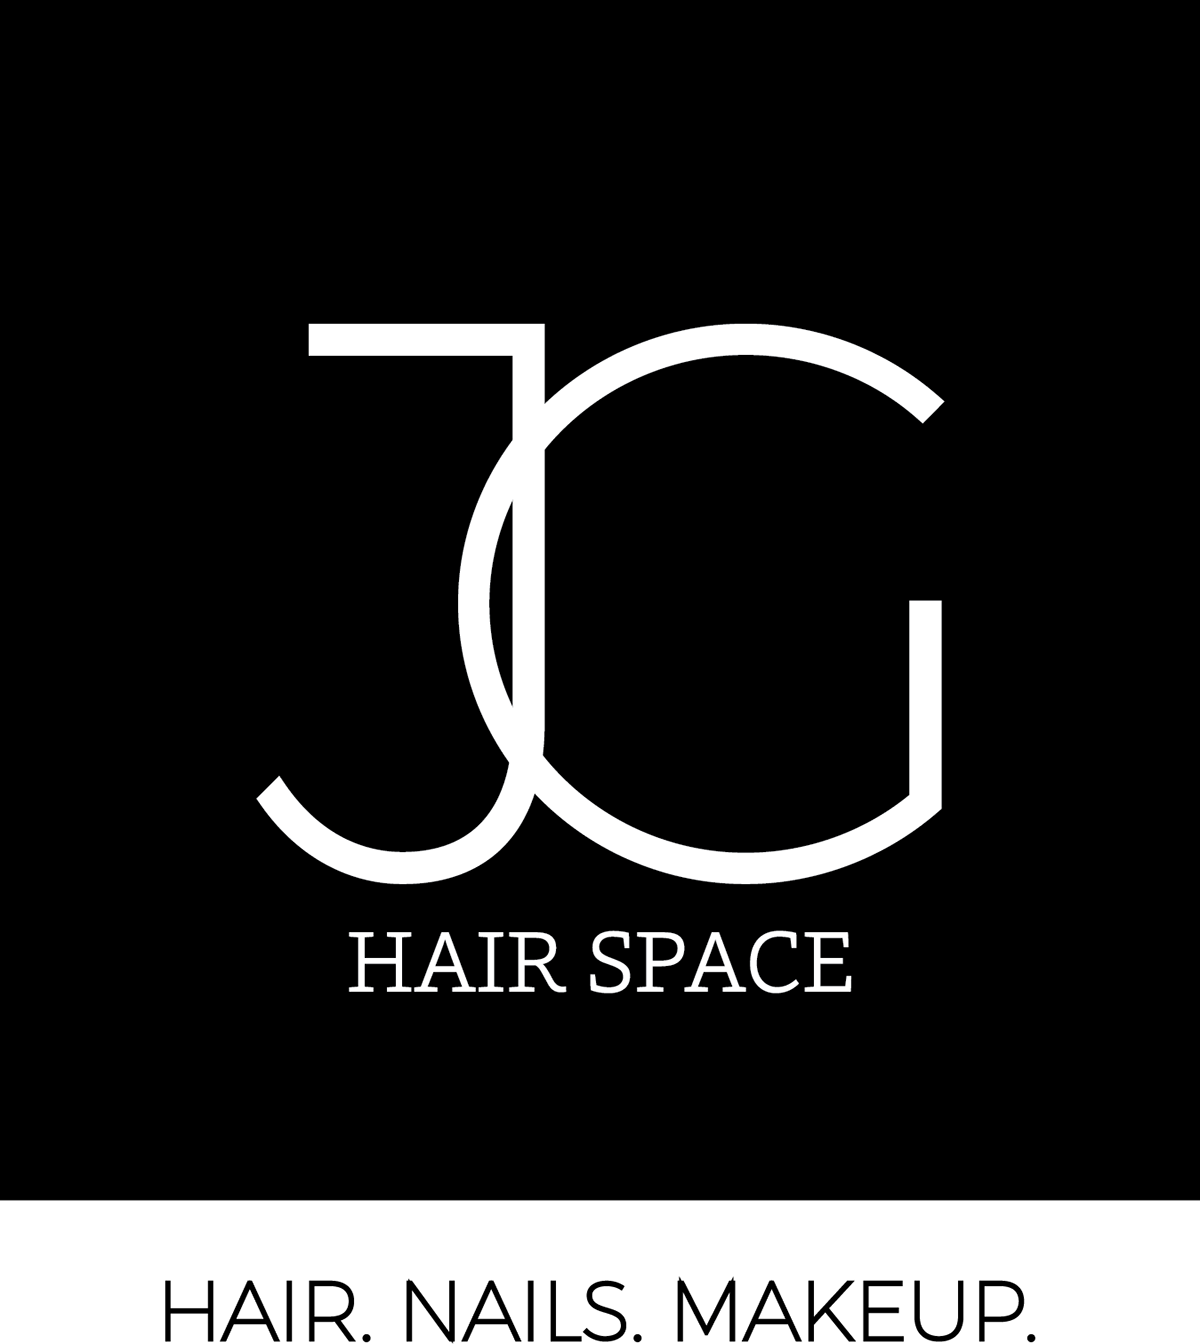 J G Logo - JG Hair Space Logo and Business Cards on Behance